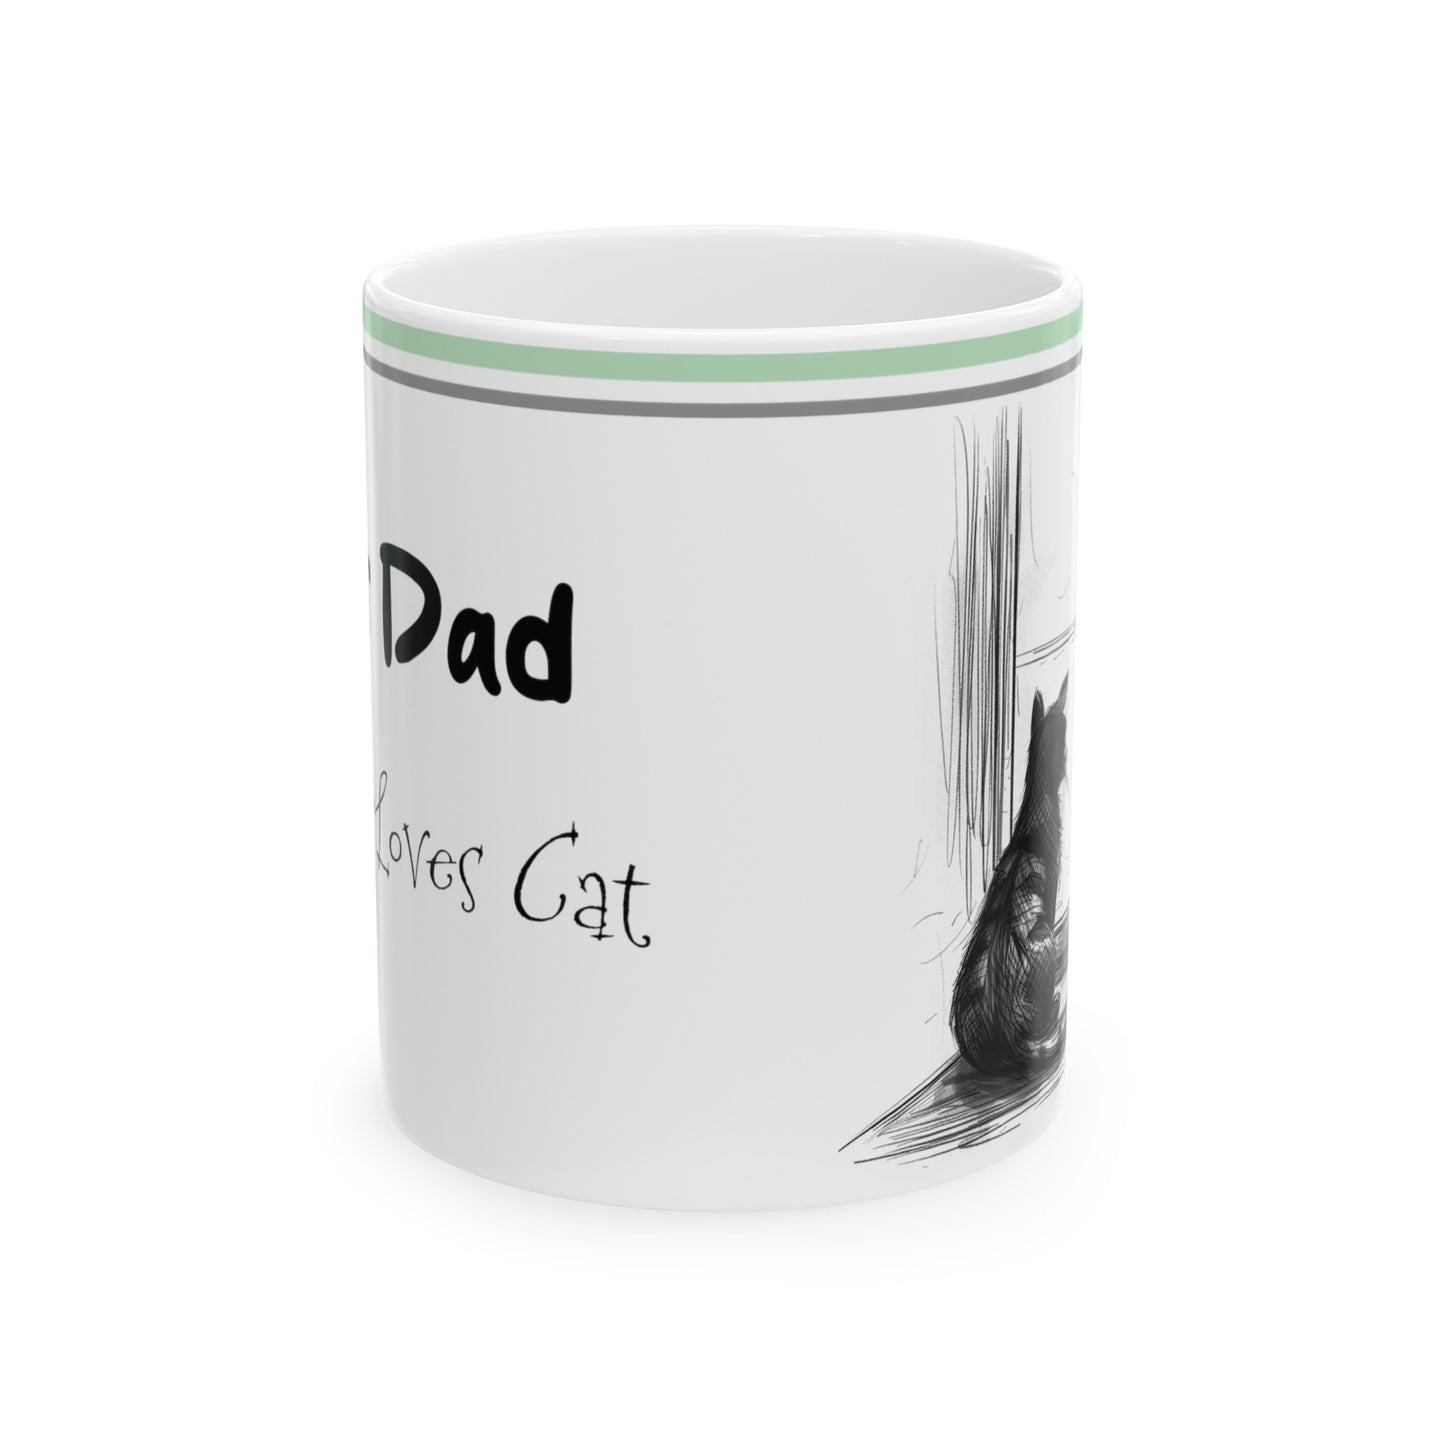 Father's Day Mug, Father Coffee Mug, Dad Loves Cat Mug, Dad Tea Cup, Father's Day Gift, Gift for him, Dad Birthday Gift